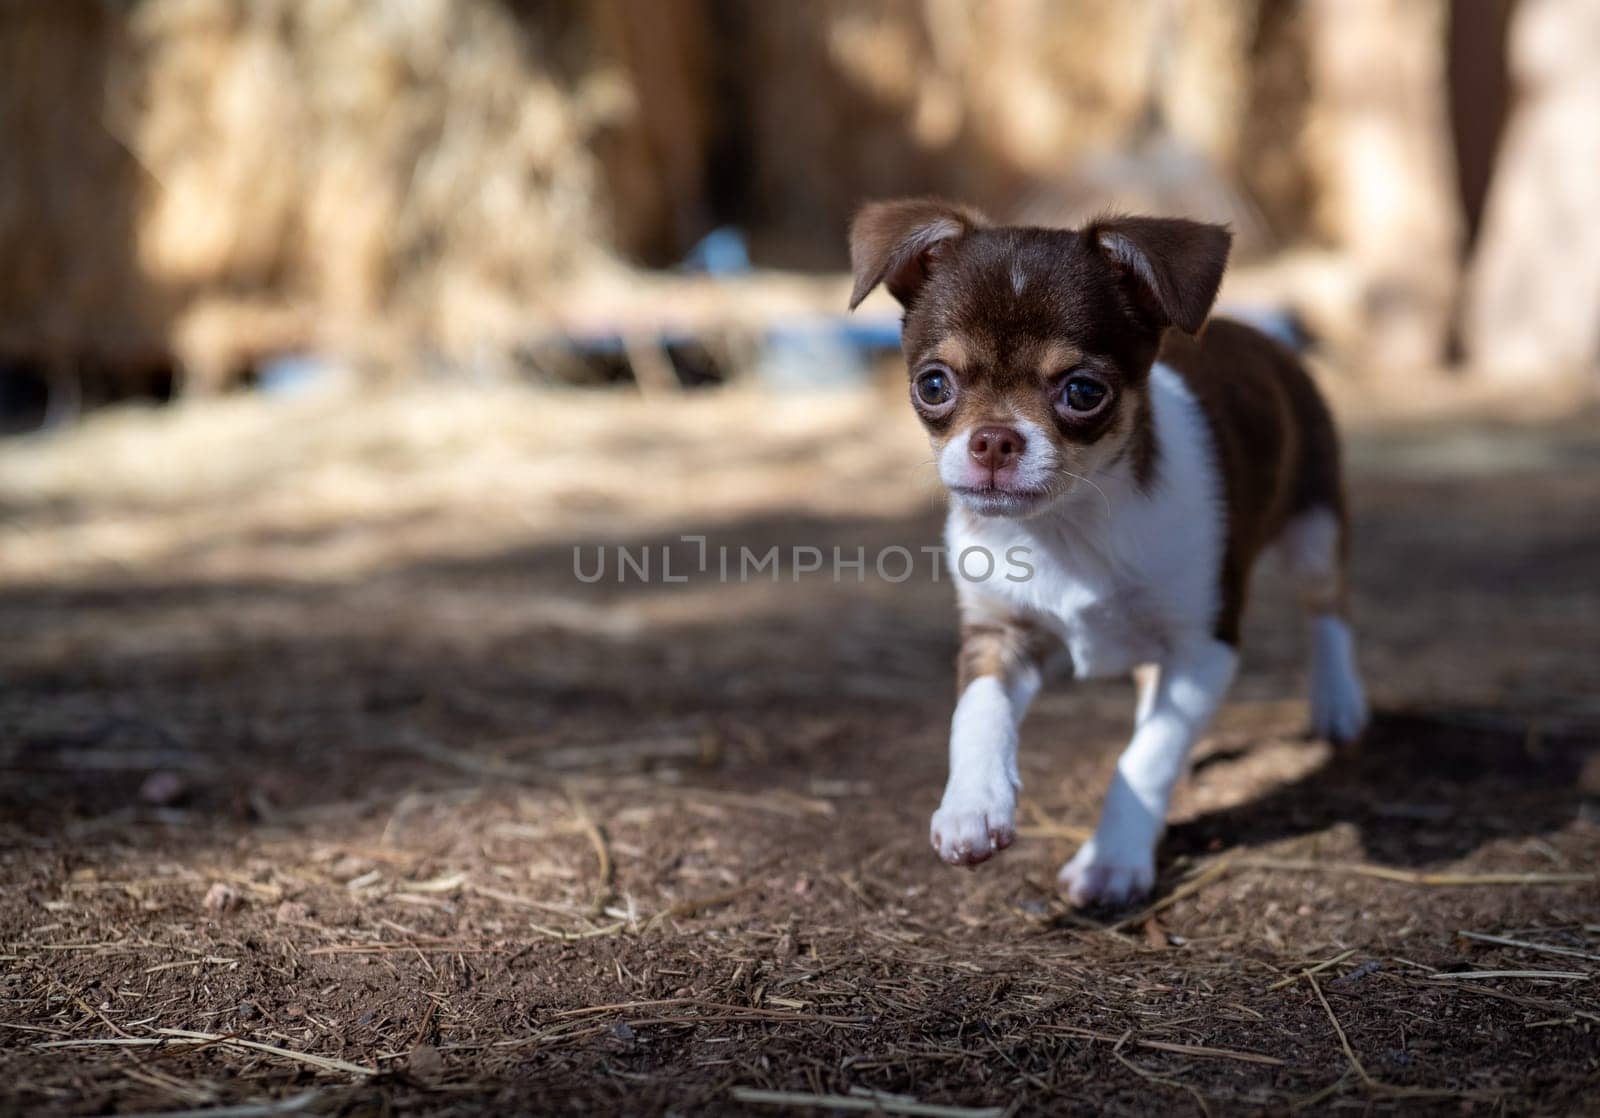 A brown and white Chihuahua puppy takes cautious steps on a straw-covered ground, exploring with determination.